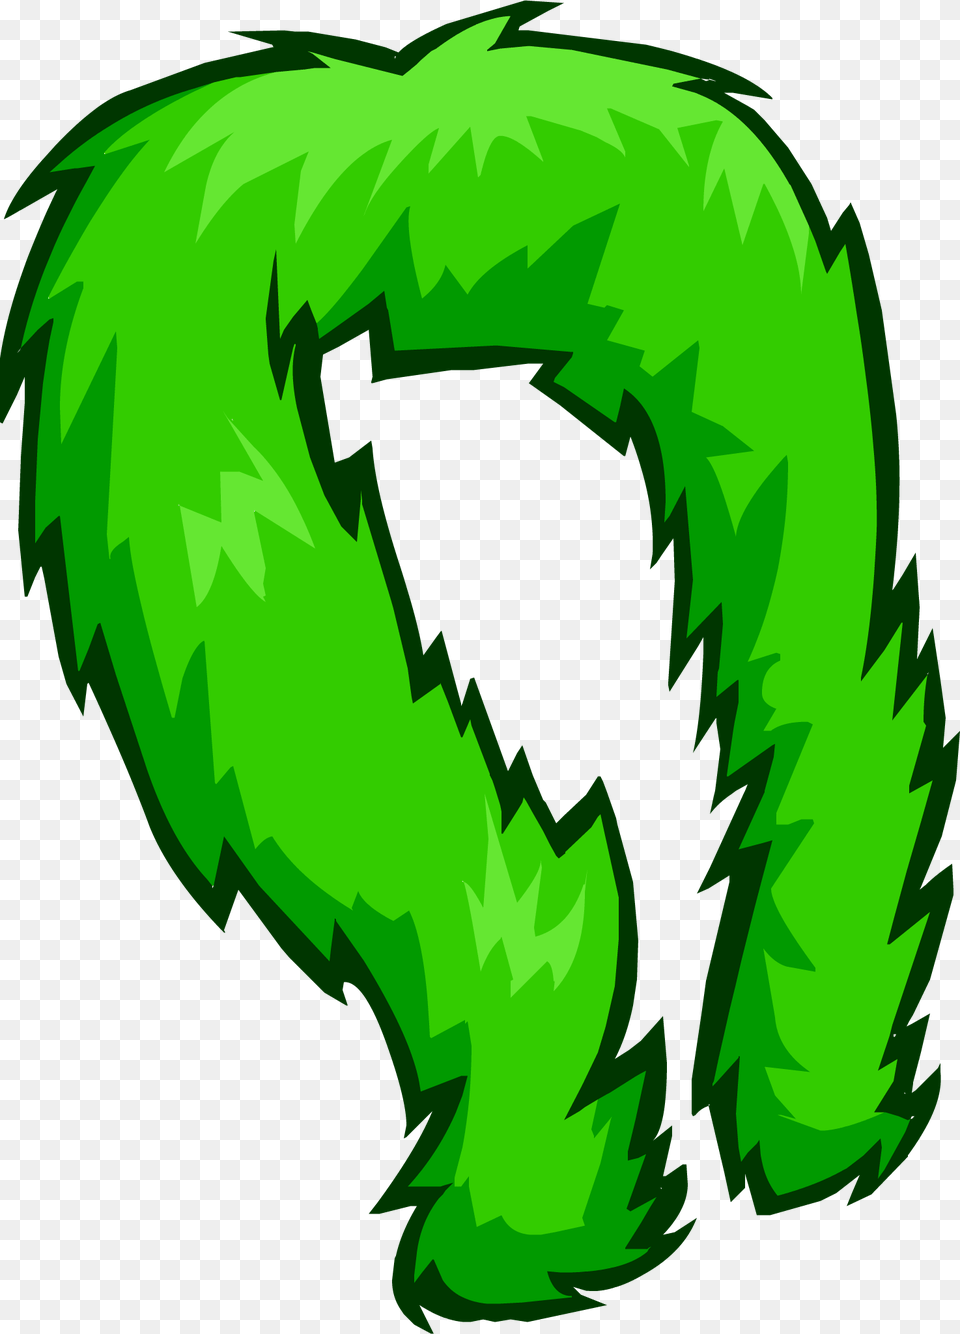 Green Feather Boa Club Penguin Boa, Adult, Male, Man, Person Png